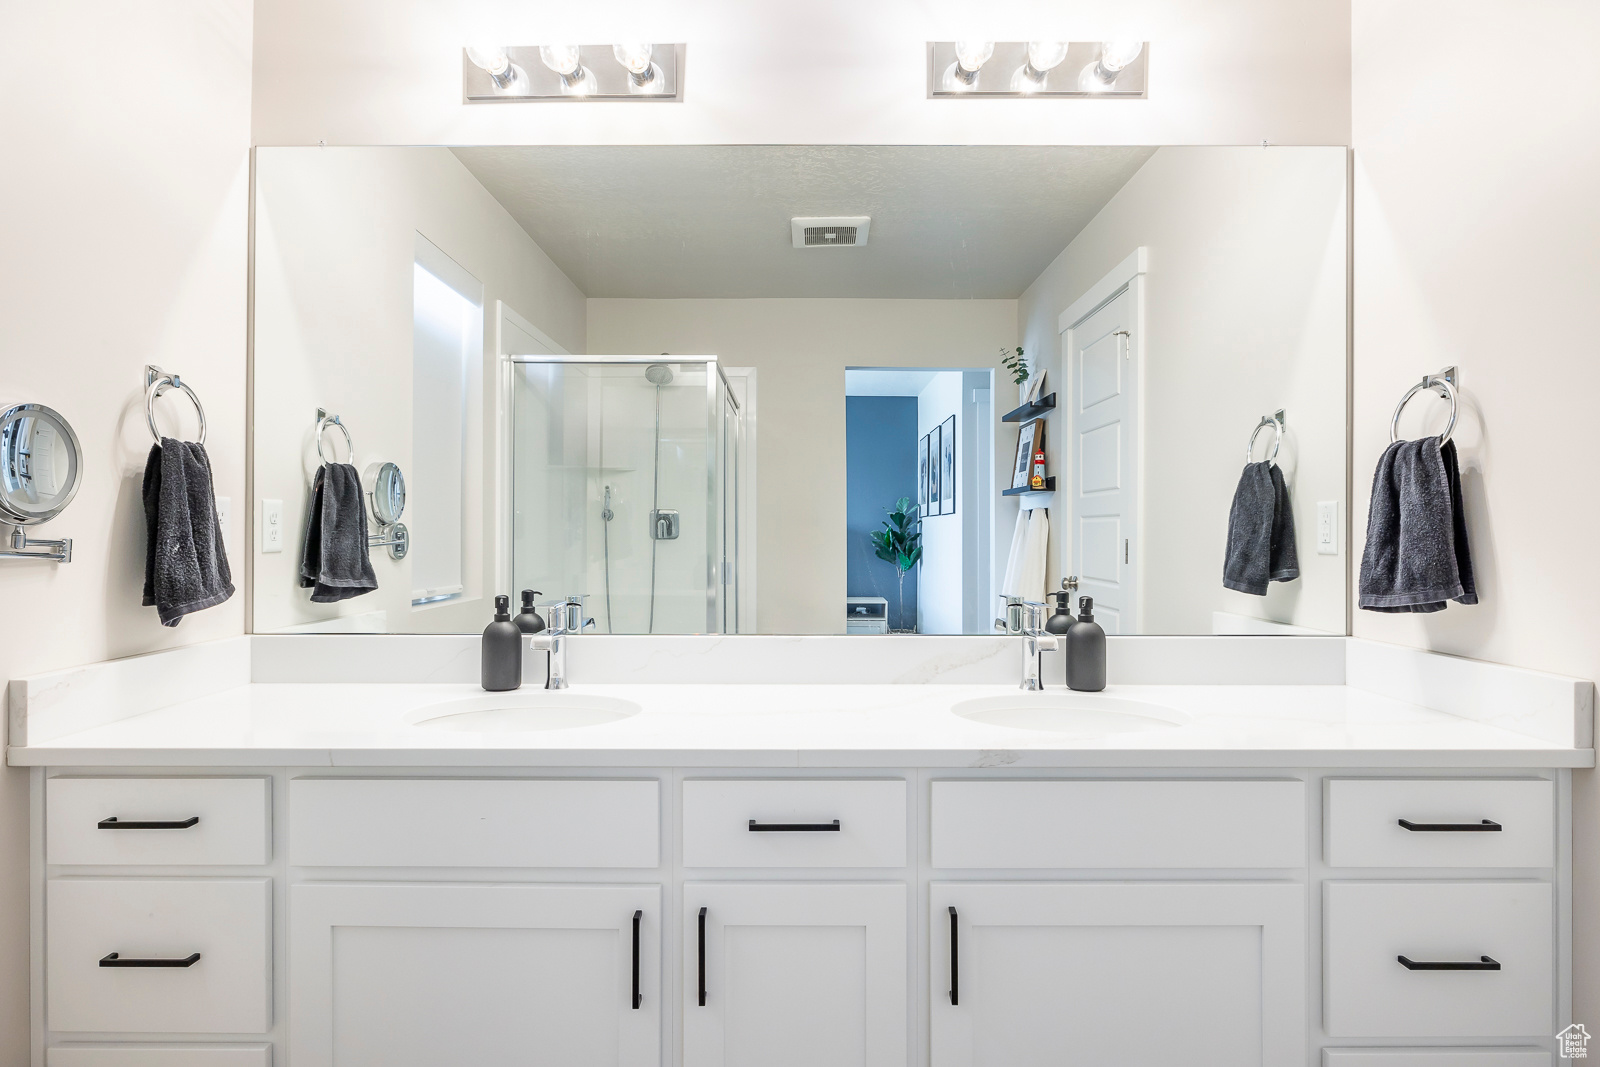 Bathroom with vanity with extensive cabinet space, dual sinks, and a shower with shower door